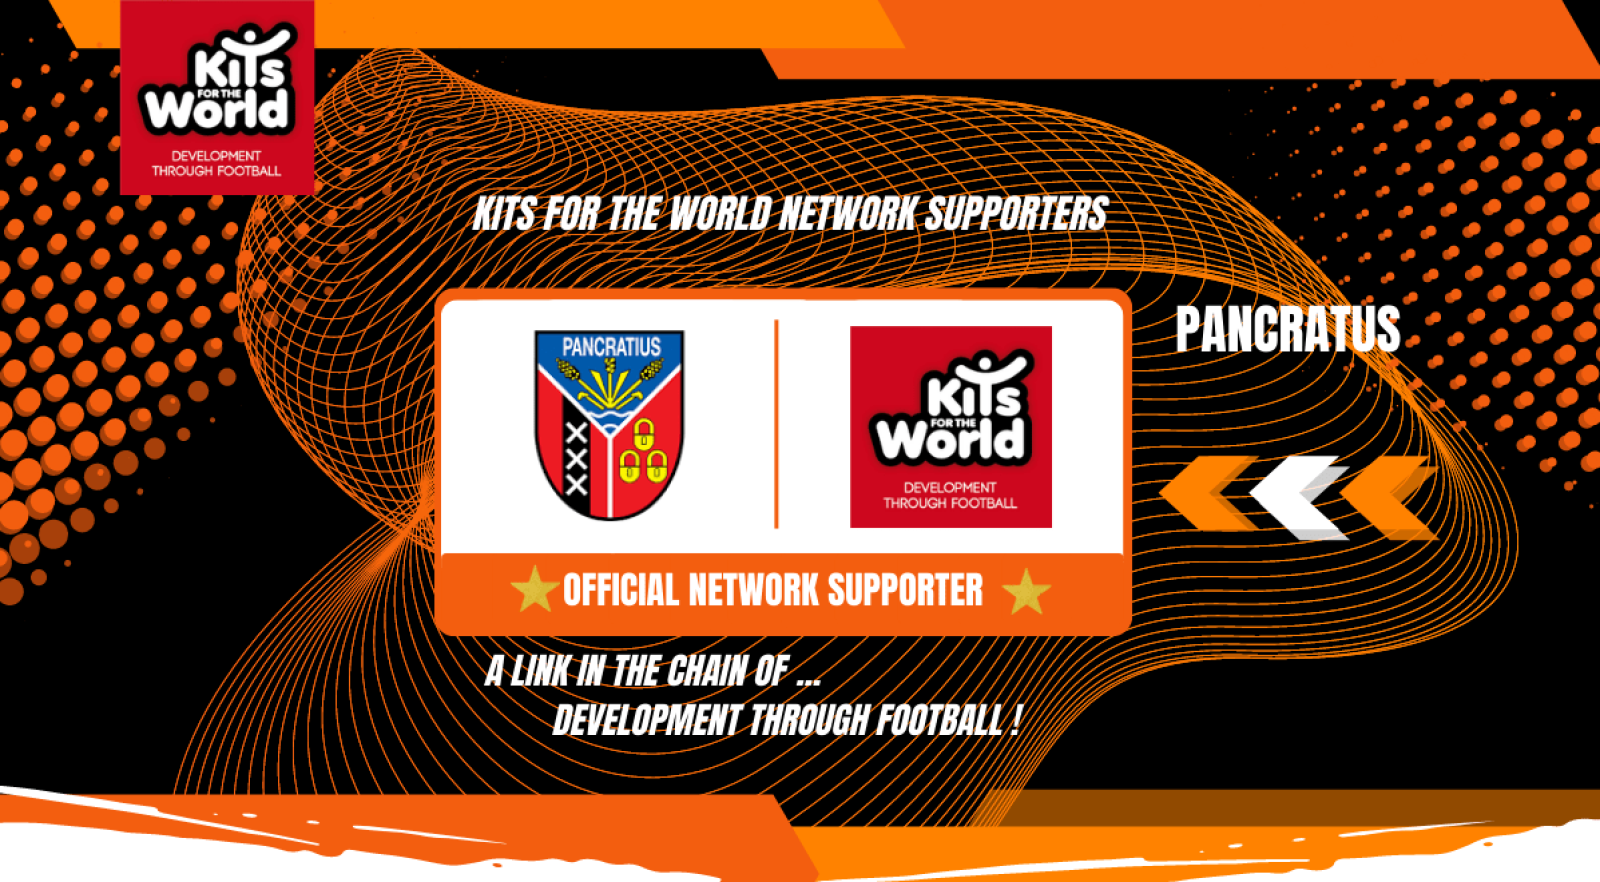 PANCRATIUS_official NETWORK SUPPORTER _Kits for the World